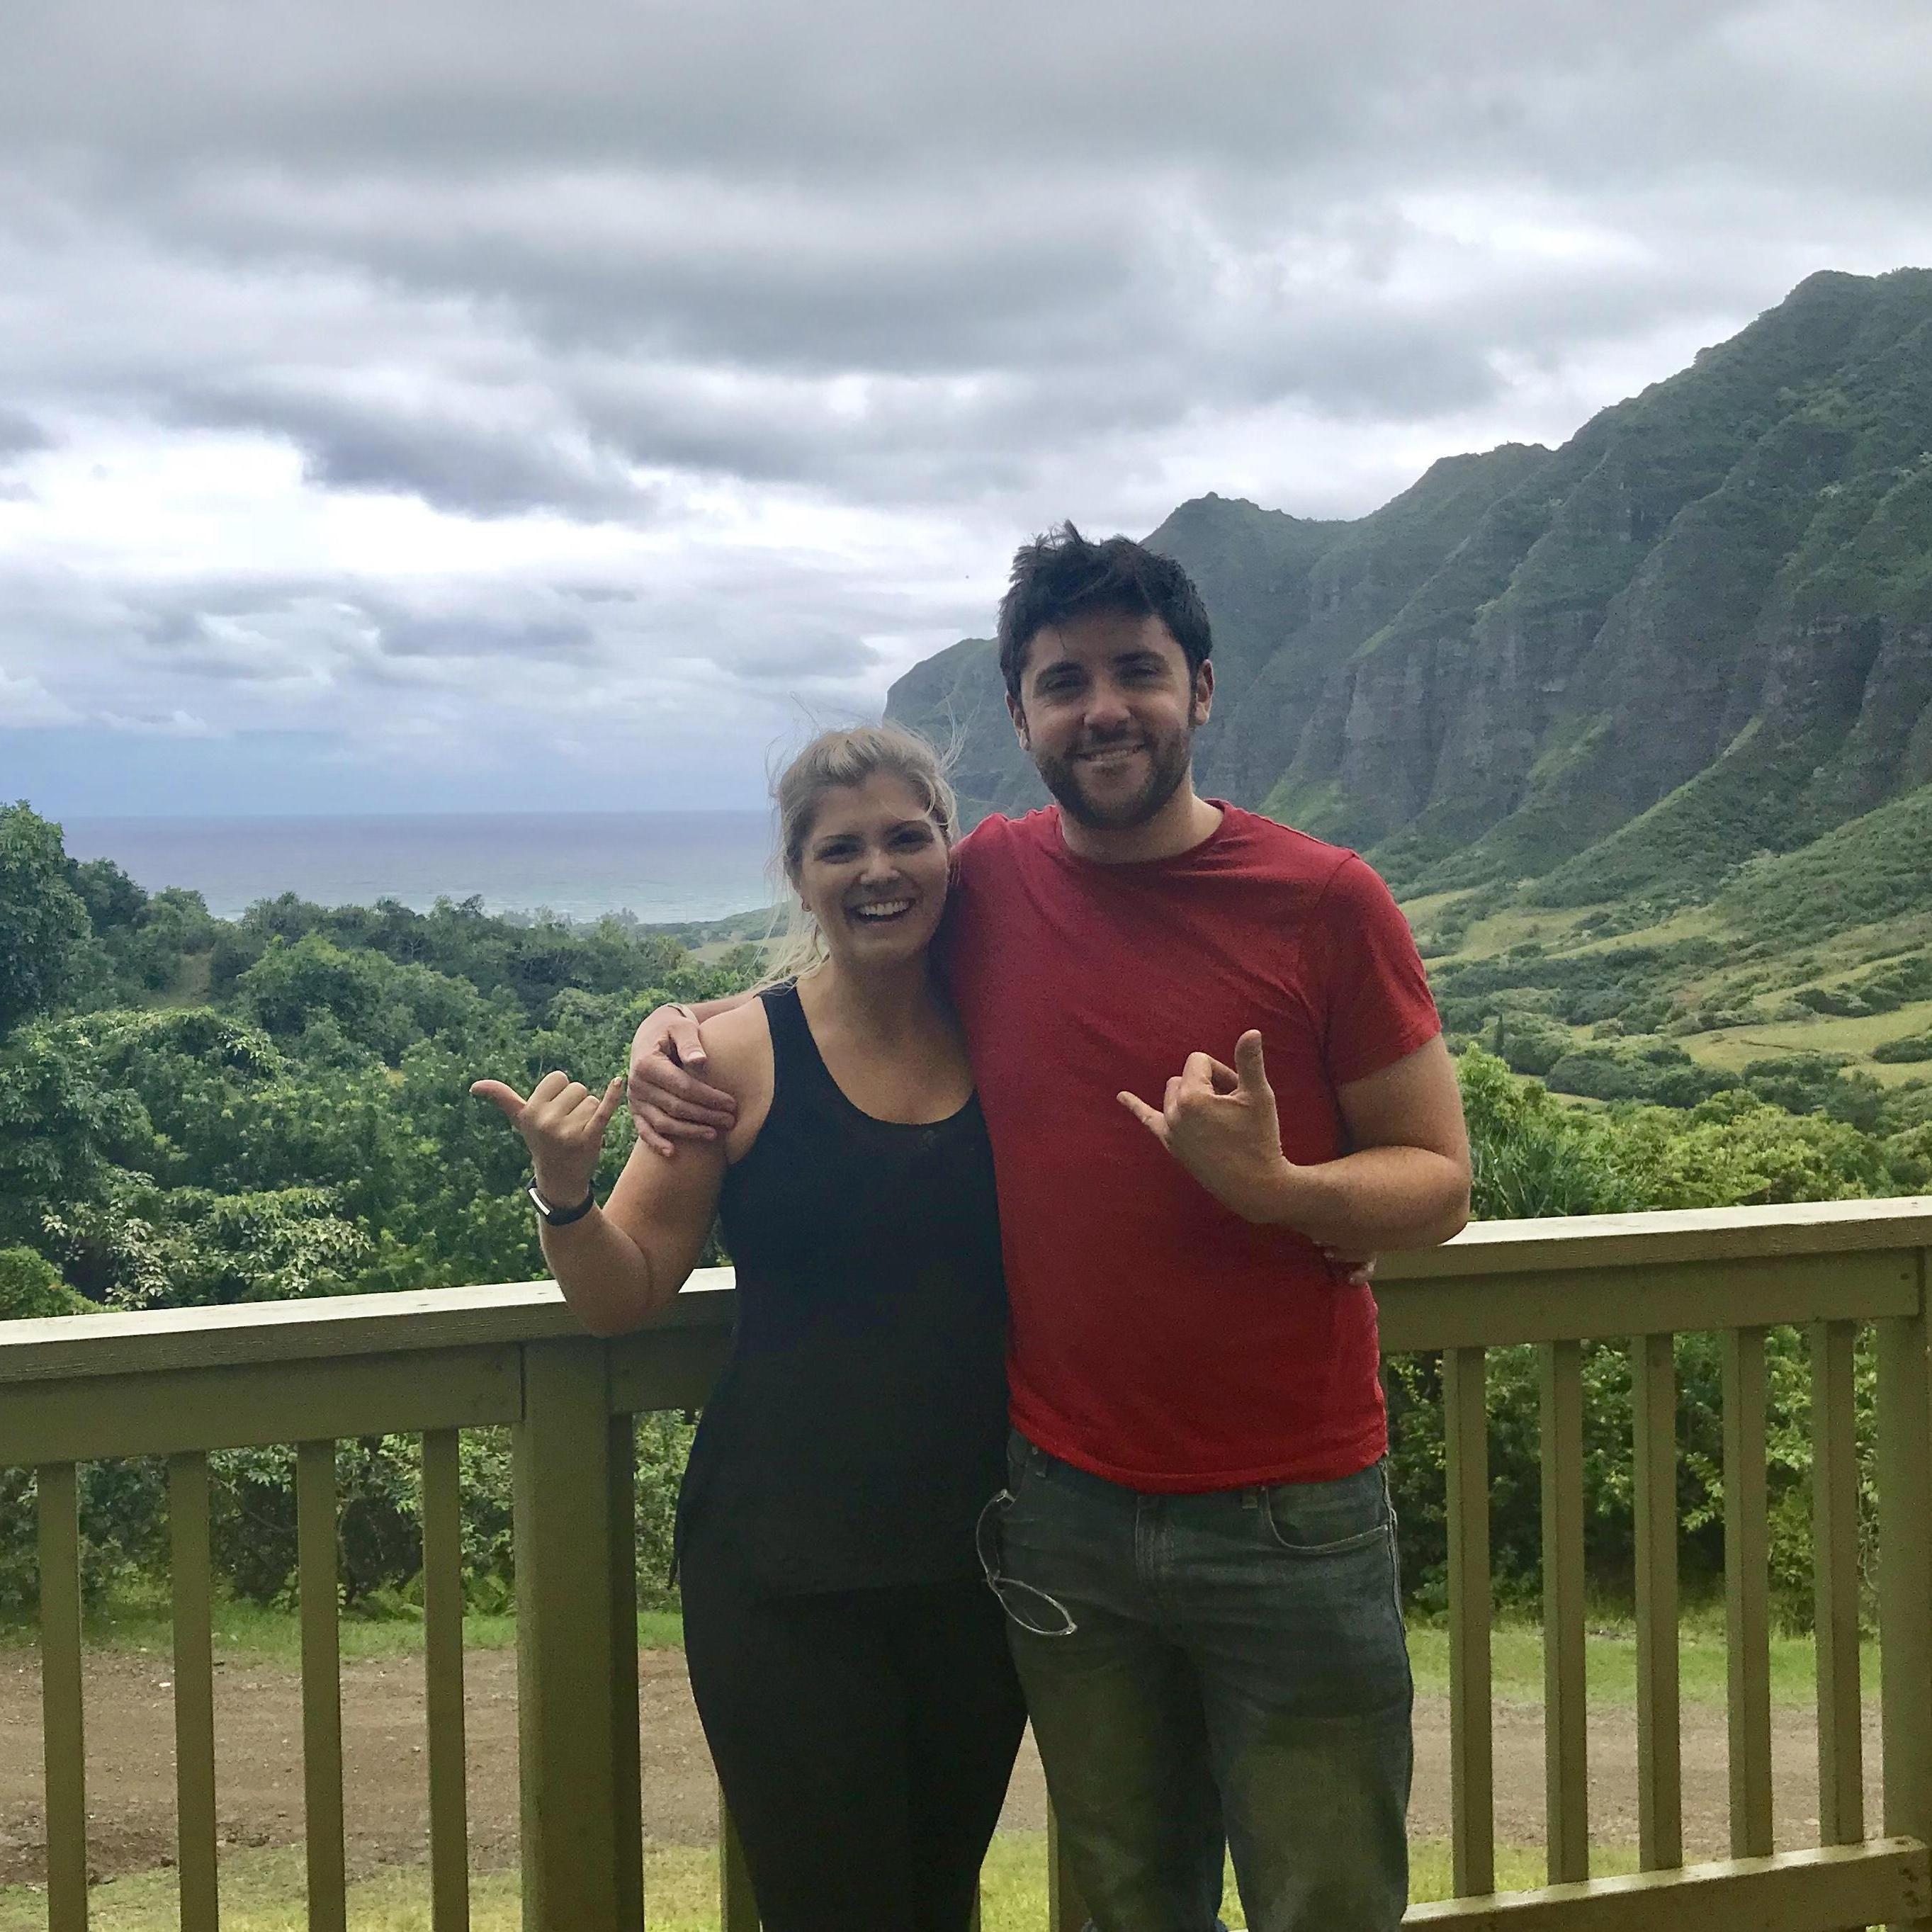 A bit dirty after driving our ATV through Kualoa Ranch on Oahu, Hawaii - set of Jurassic Park and Lost
2018